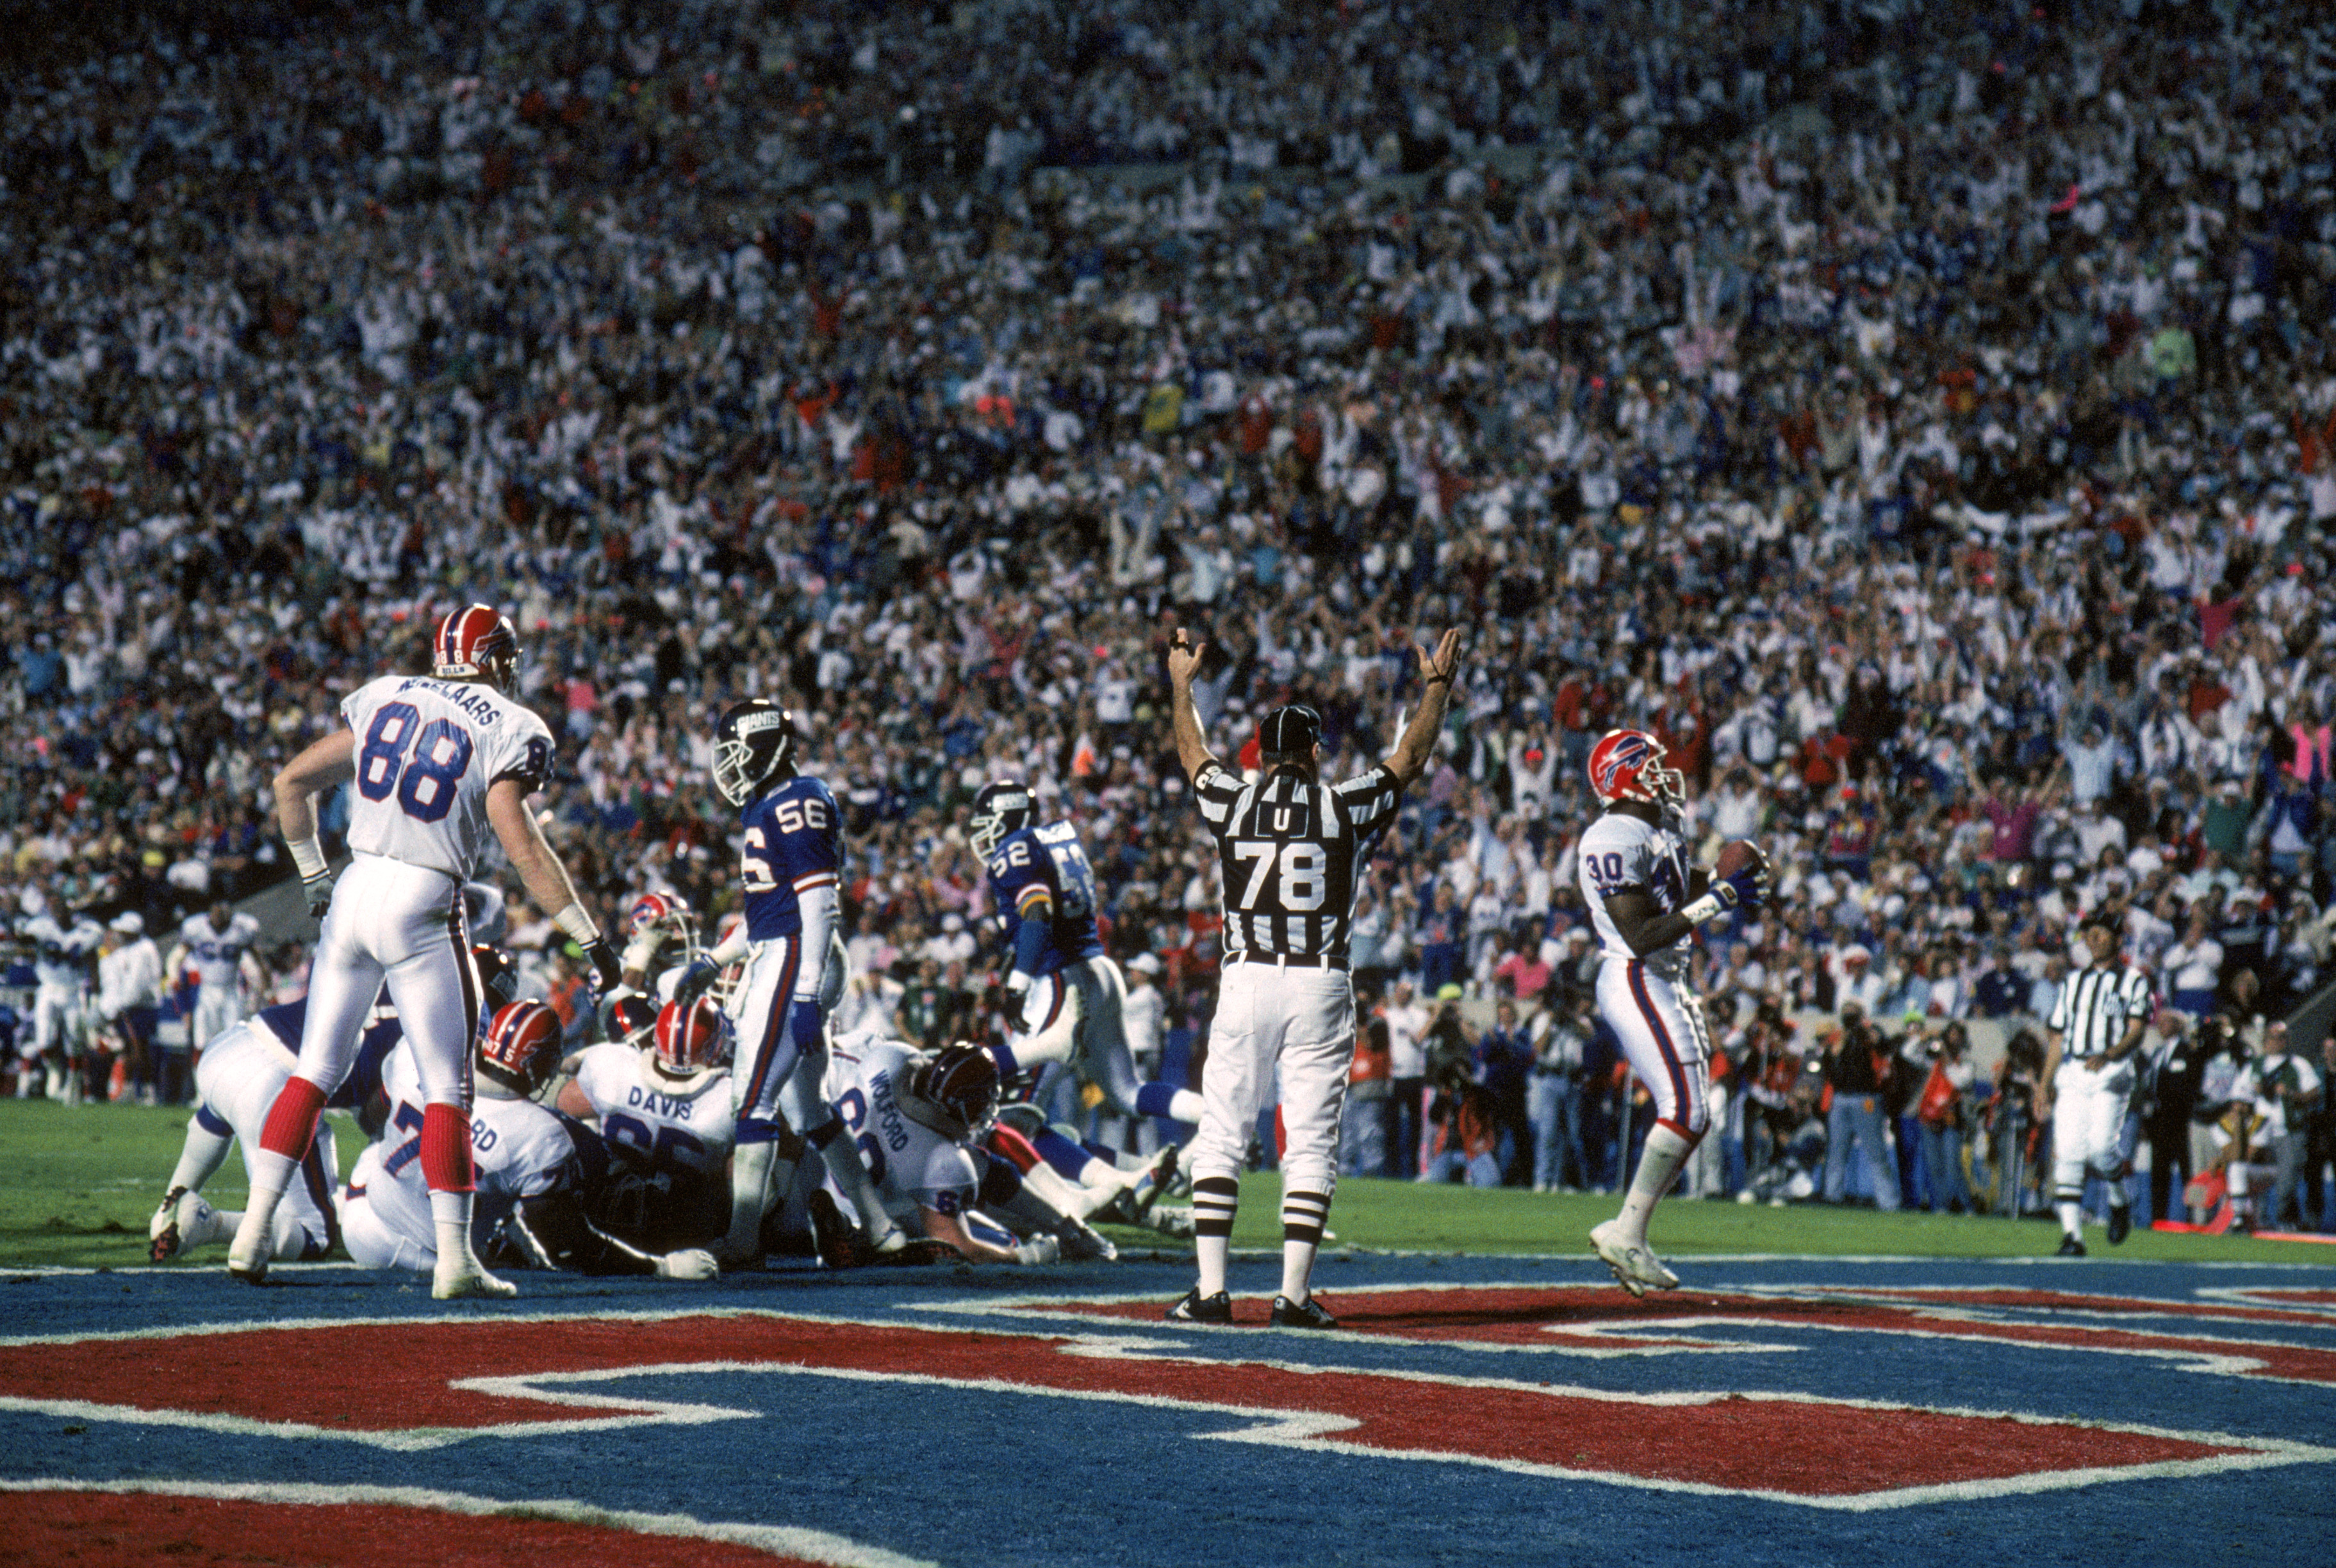 TAMPA, FL - JANUARY 27:  Running back Don Smith #30 of the Buffalo Bills celebrates after a one yard touchdown run during Super Bowl XXV against the New York Giants at Tampa Stadium on January 27, 1991 in Tampa, Florida.  The Giants won 20-19.  (Photo by